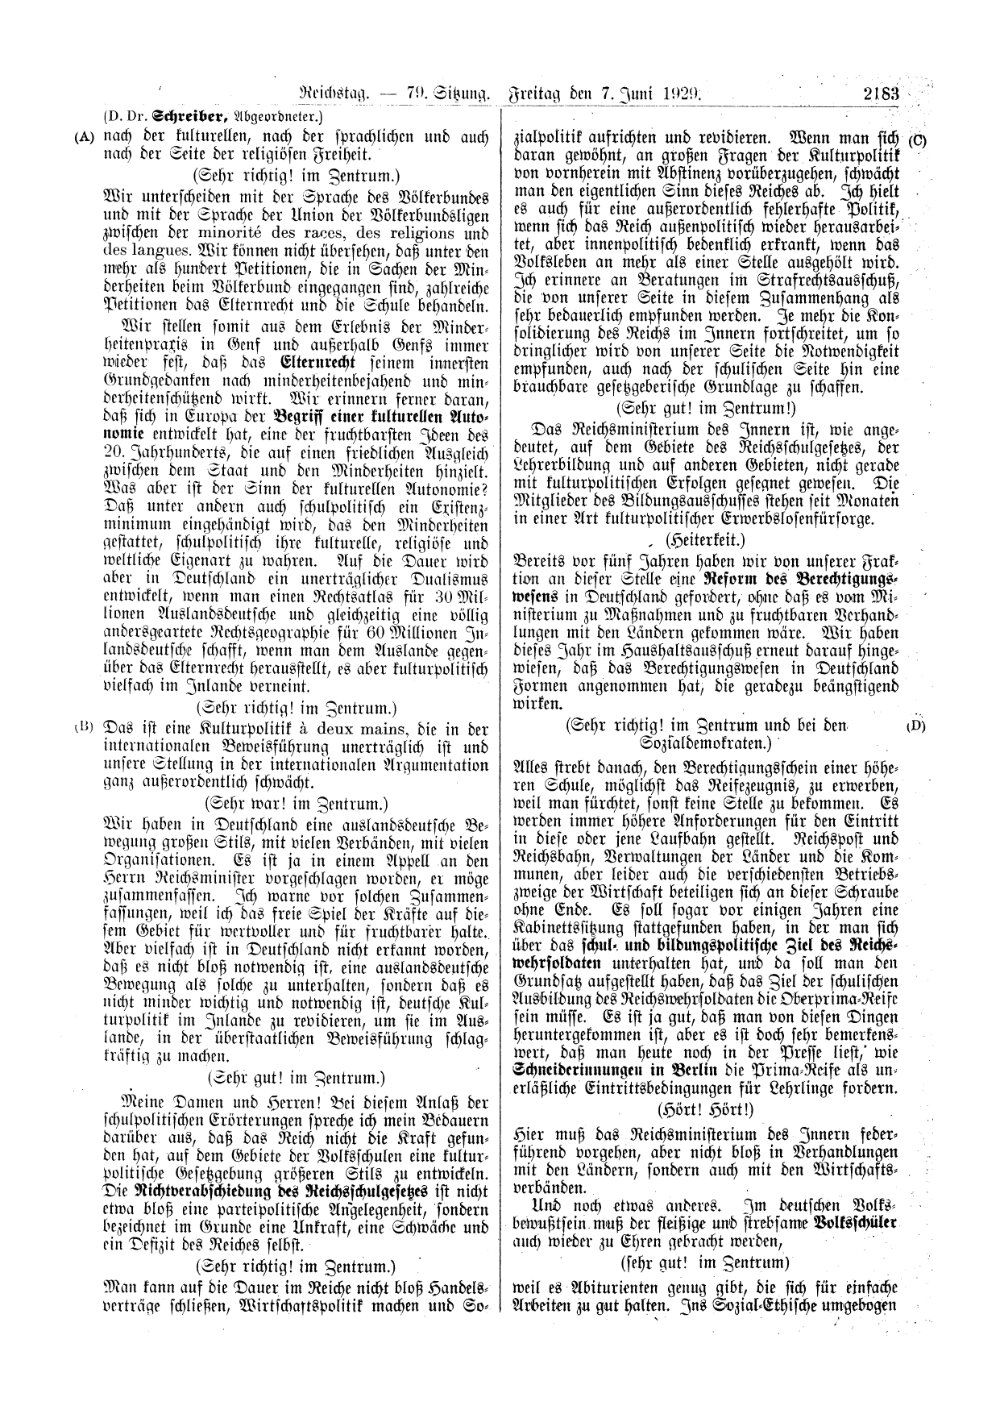 Scan of page 2183